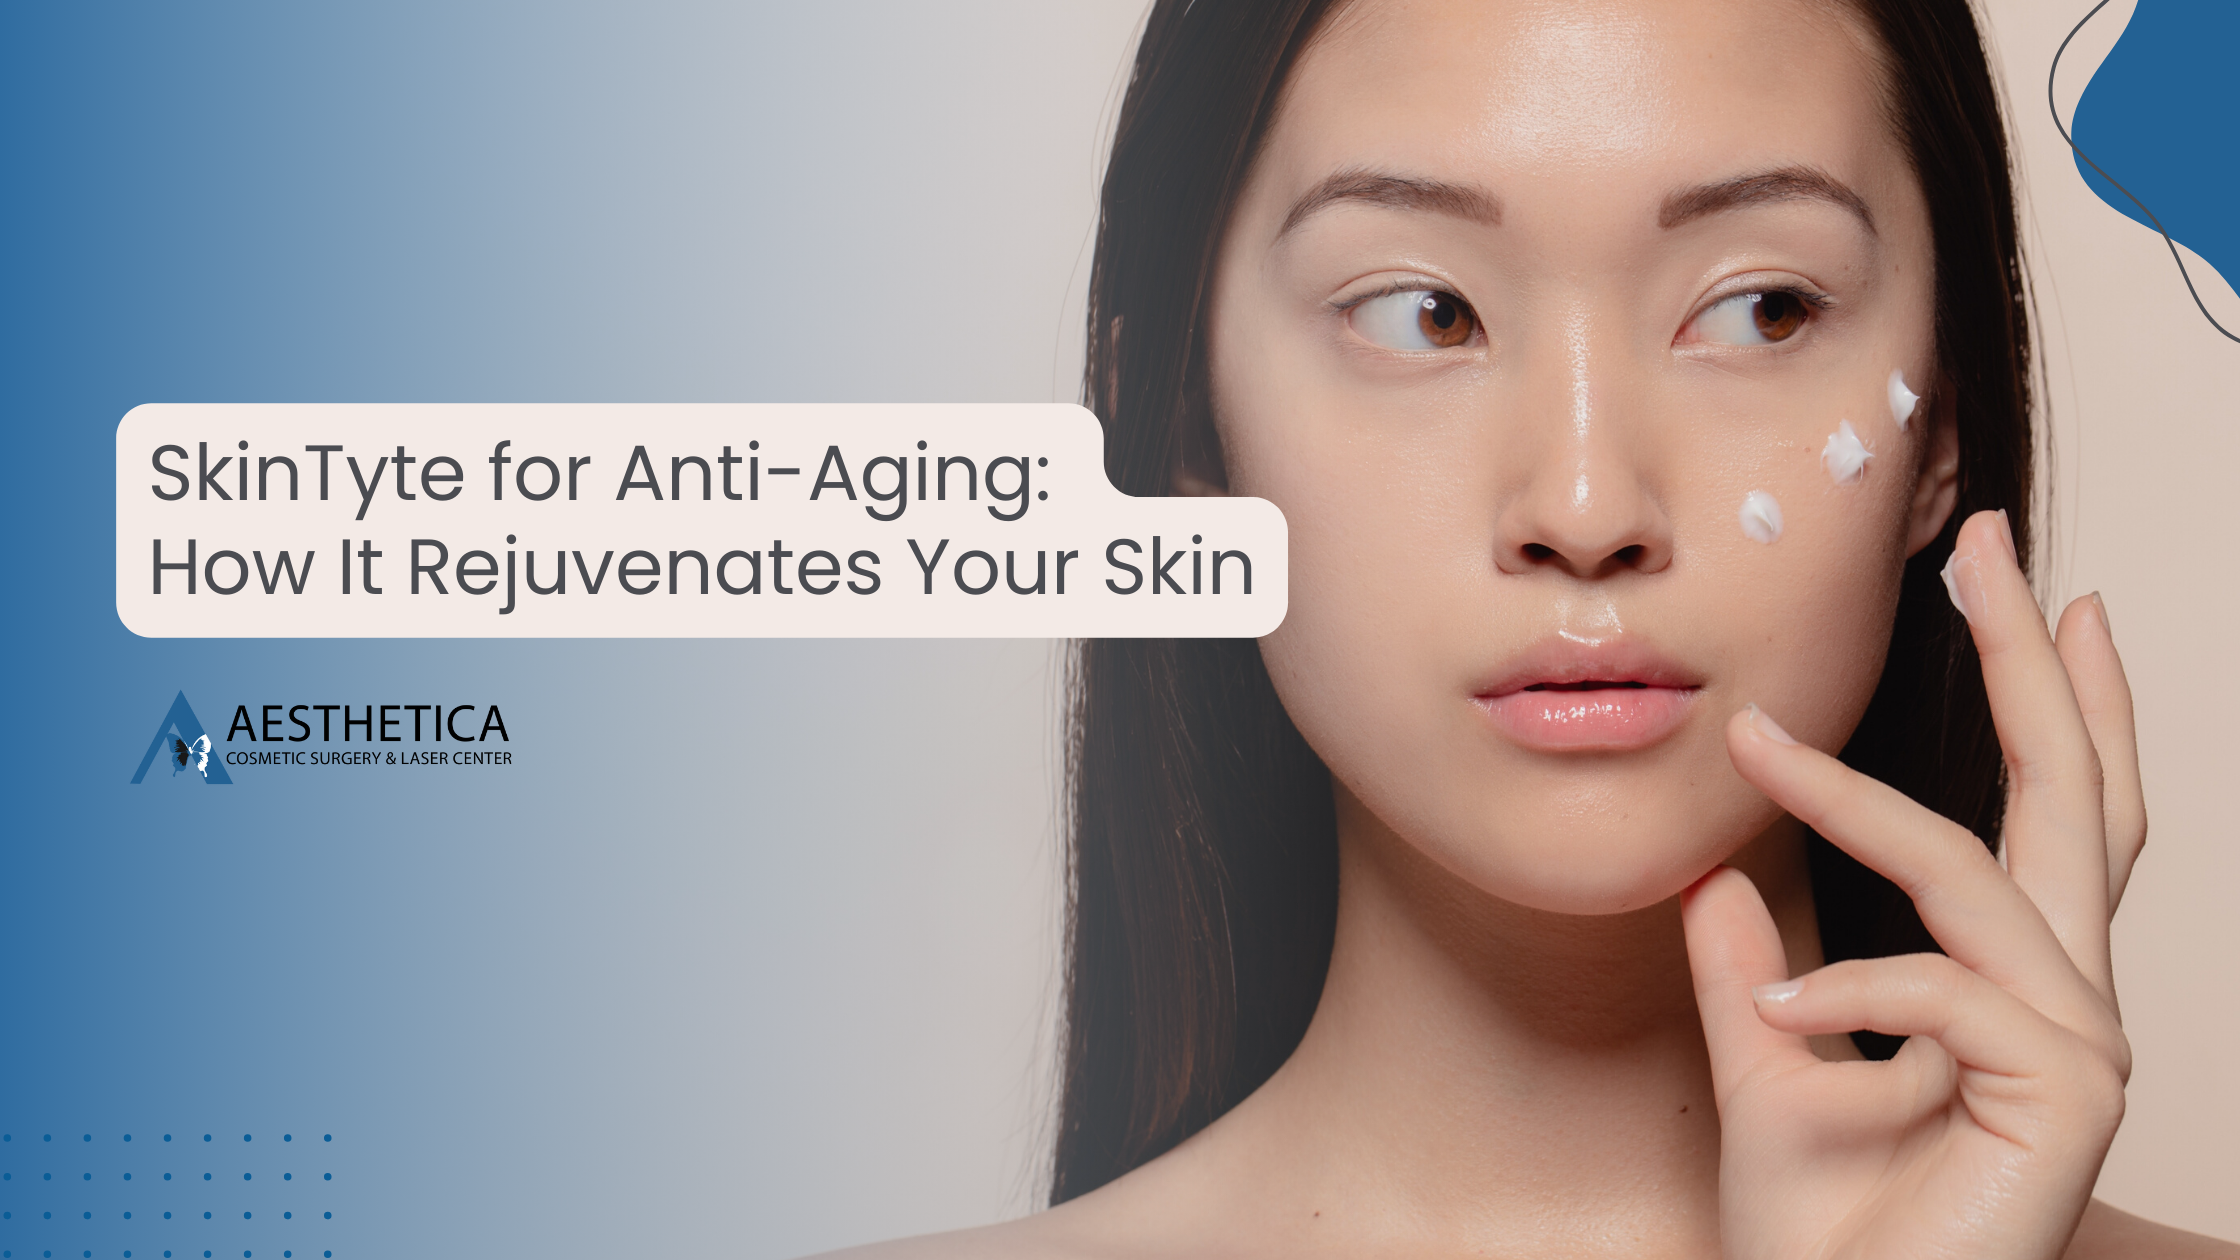 SkinTyte for Anti-Aging: How It Rejuvenates Your Skin